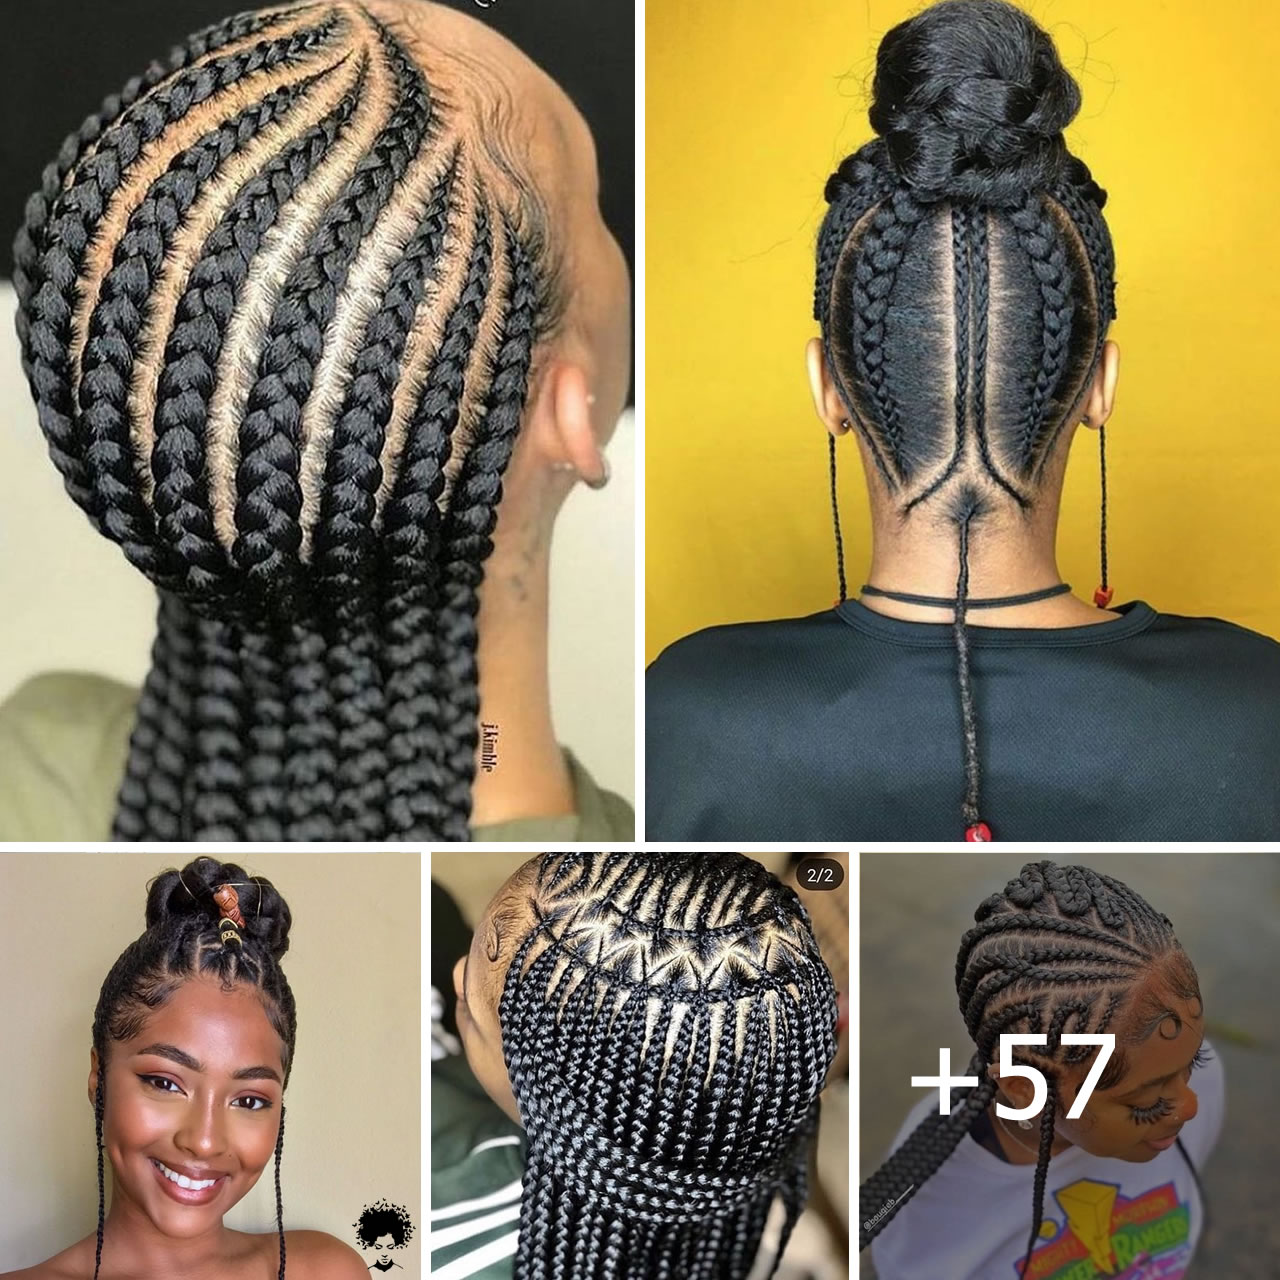 57-Photos-Best-Braided-Hairstyles-To-Look-Gorgeous-1.jpg (1280×1280)